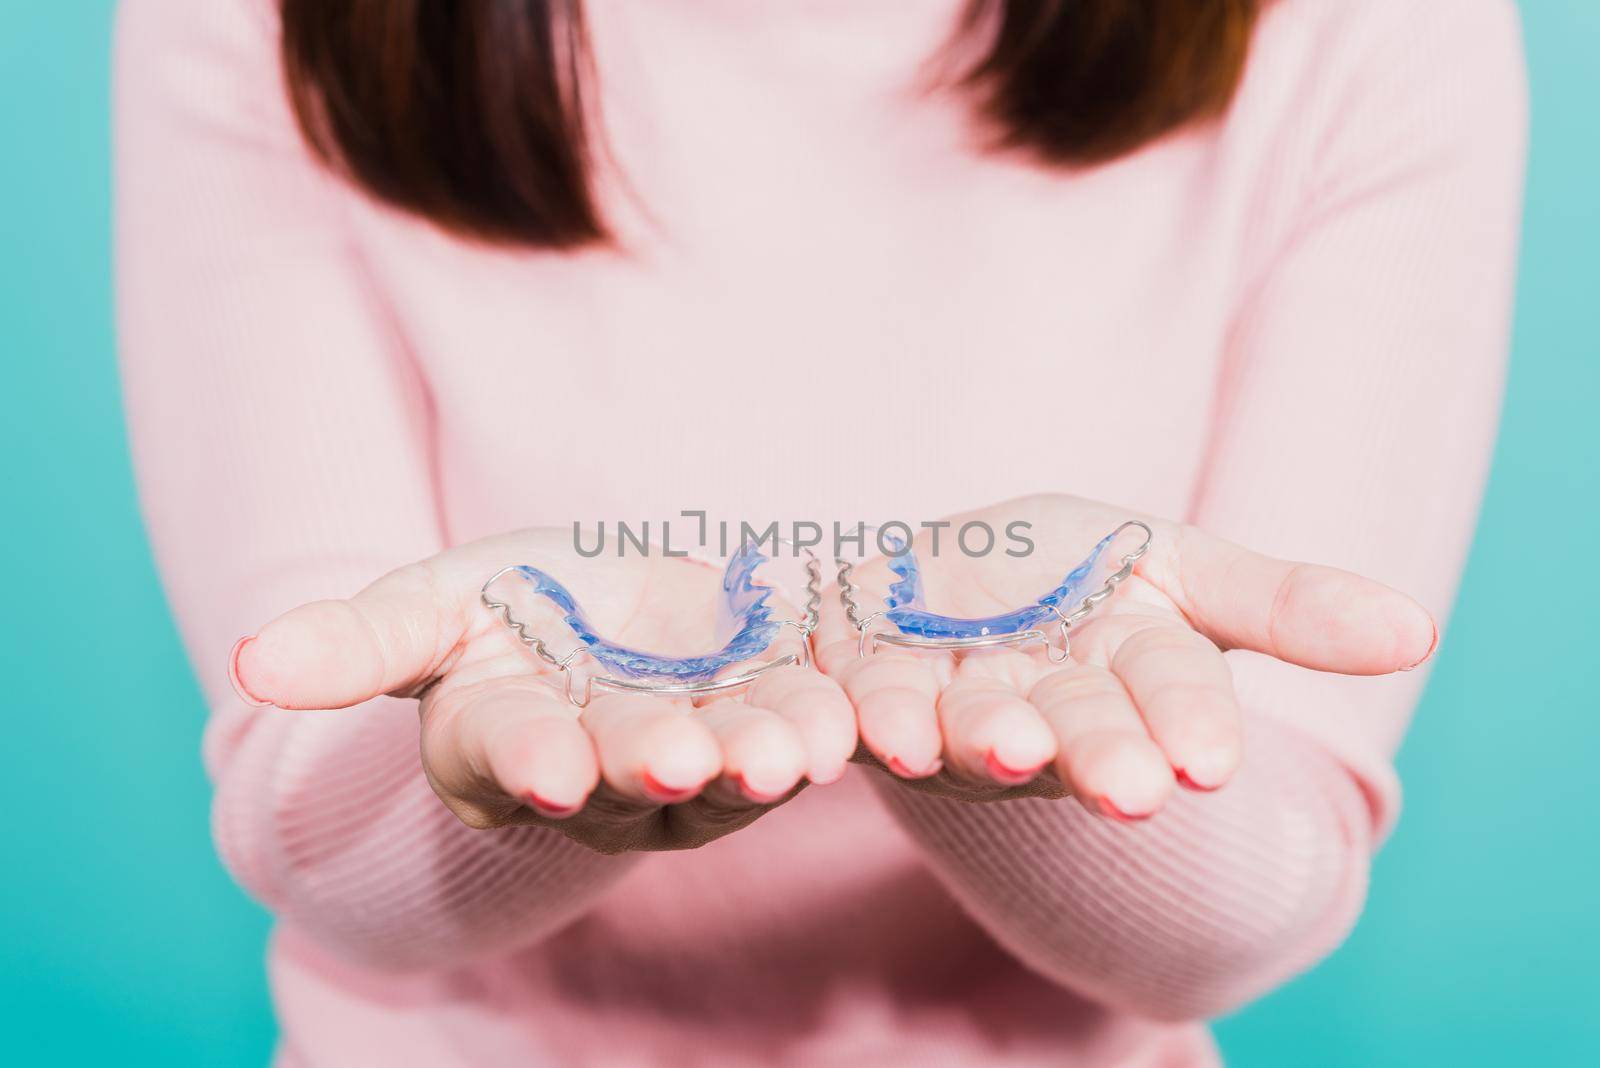 Close up hands of young woman holding silicone orthodontic retainers for teeth by Sorapop